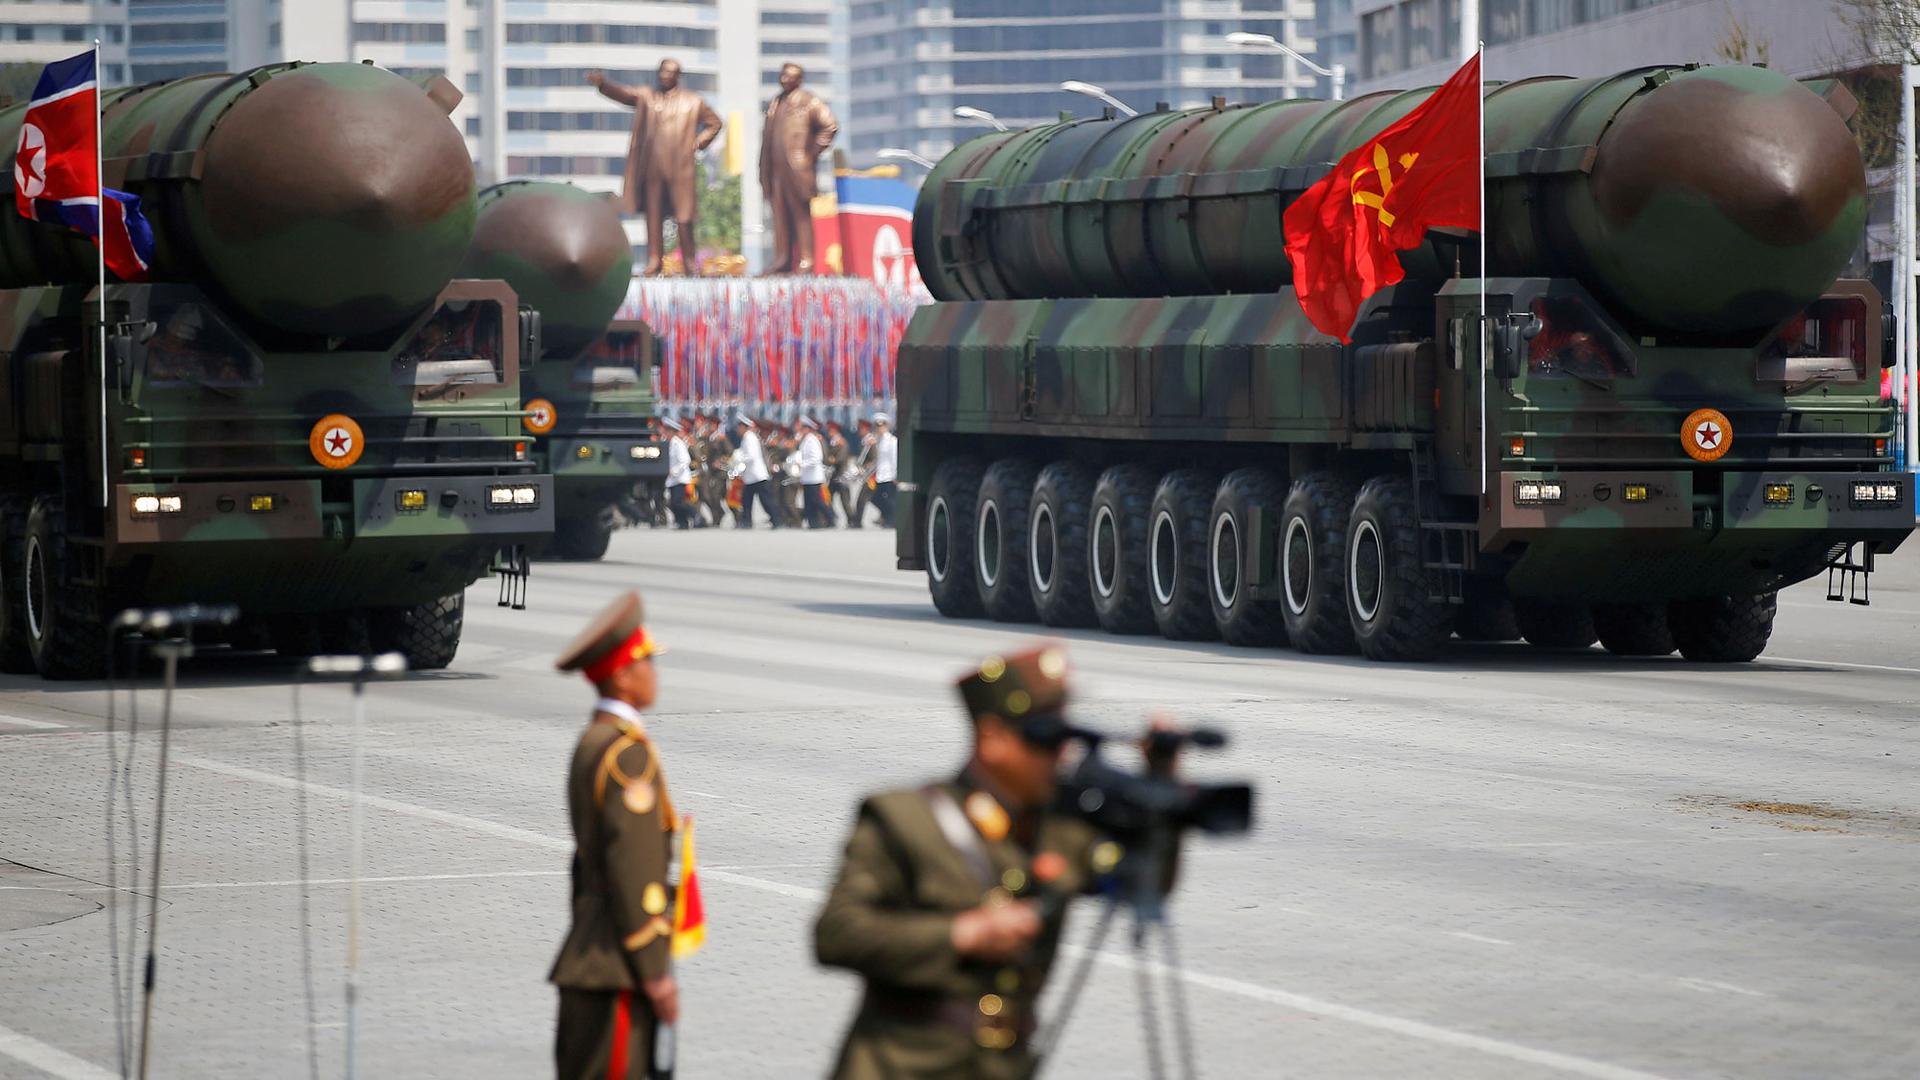 Intercontinental ballistic missiles are shown atop eight-wheeled camoflaged trucks being driven down a street.